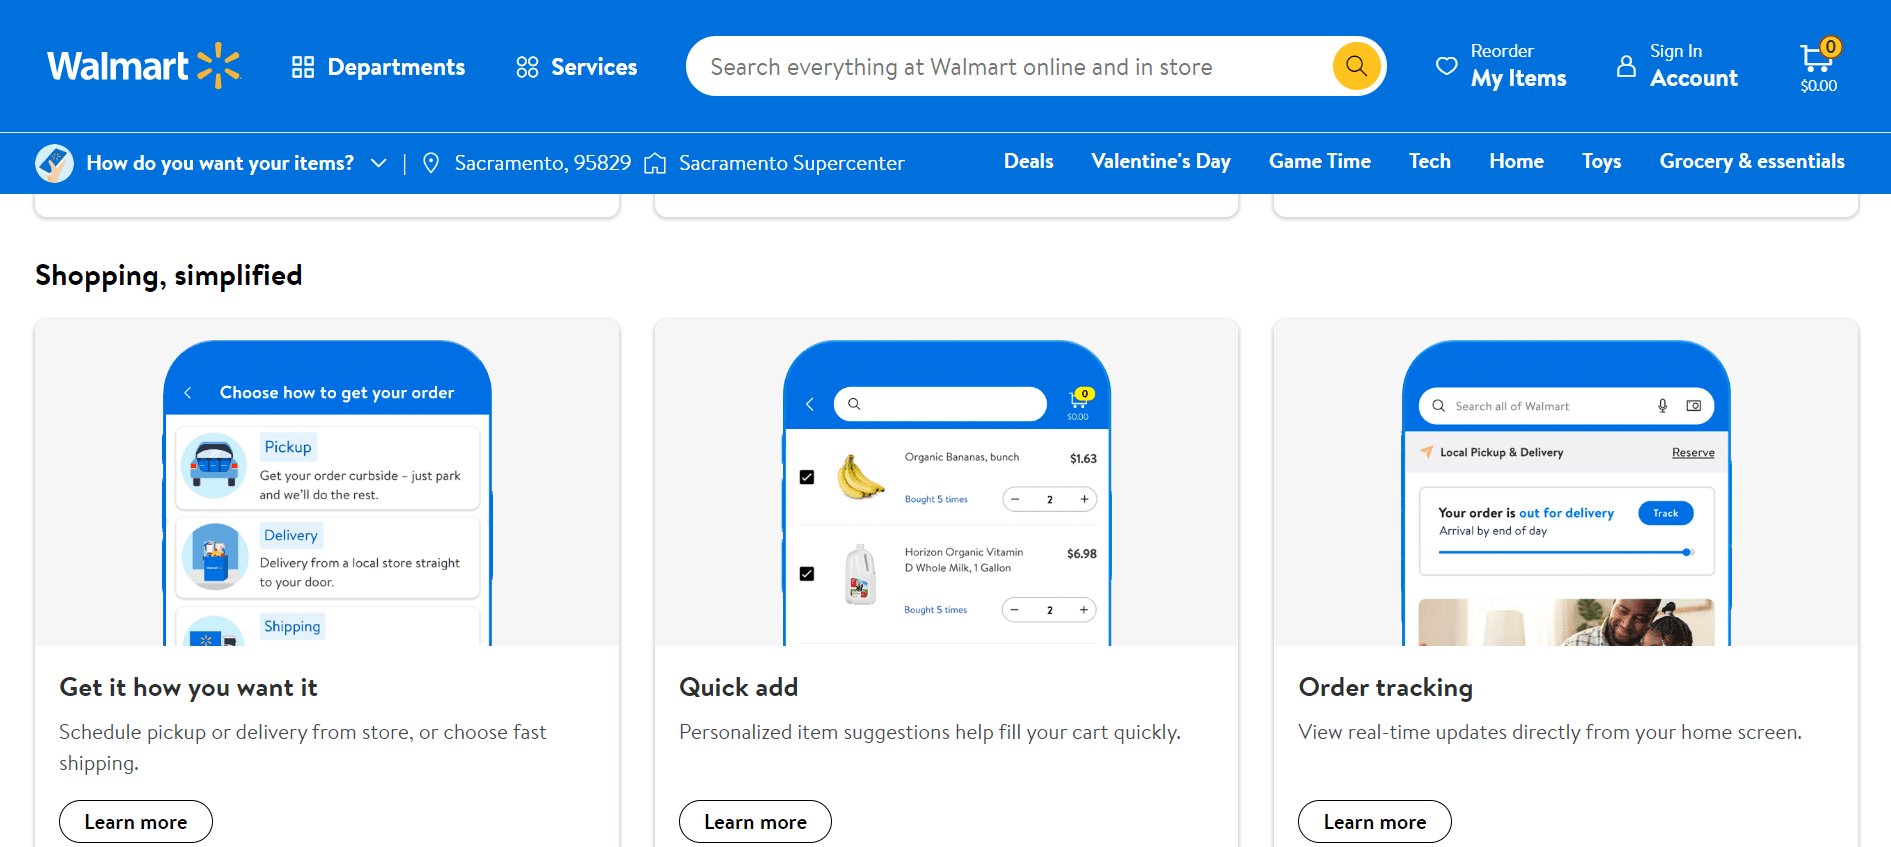 How to Fix Walmart App Issues or Not Working?